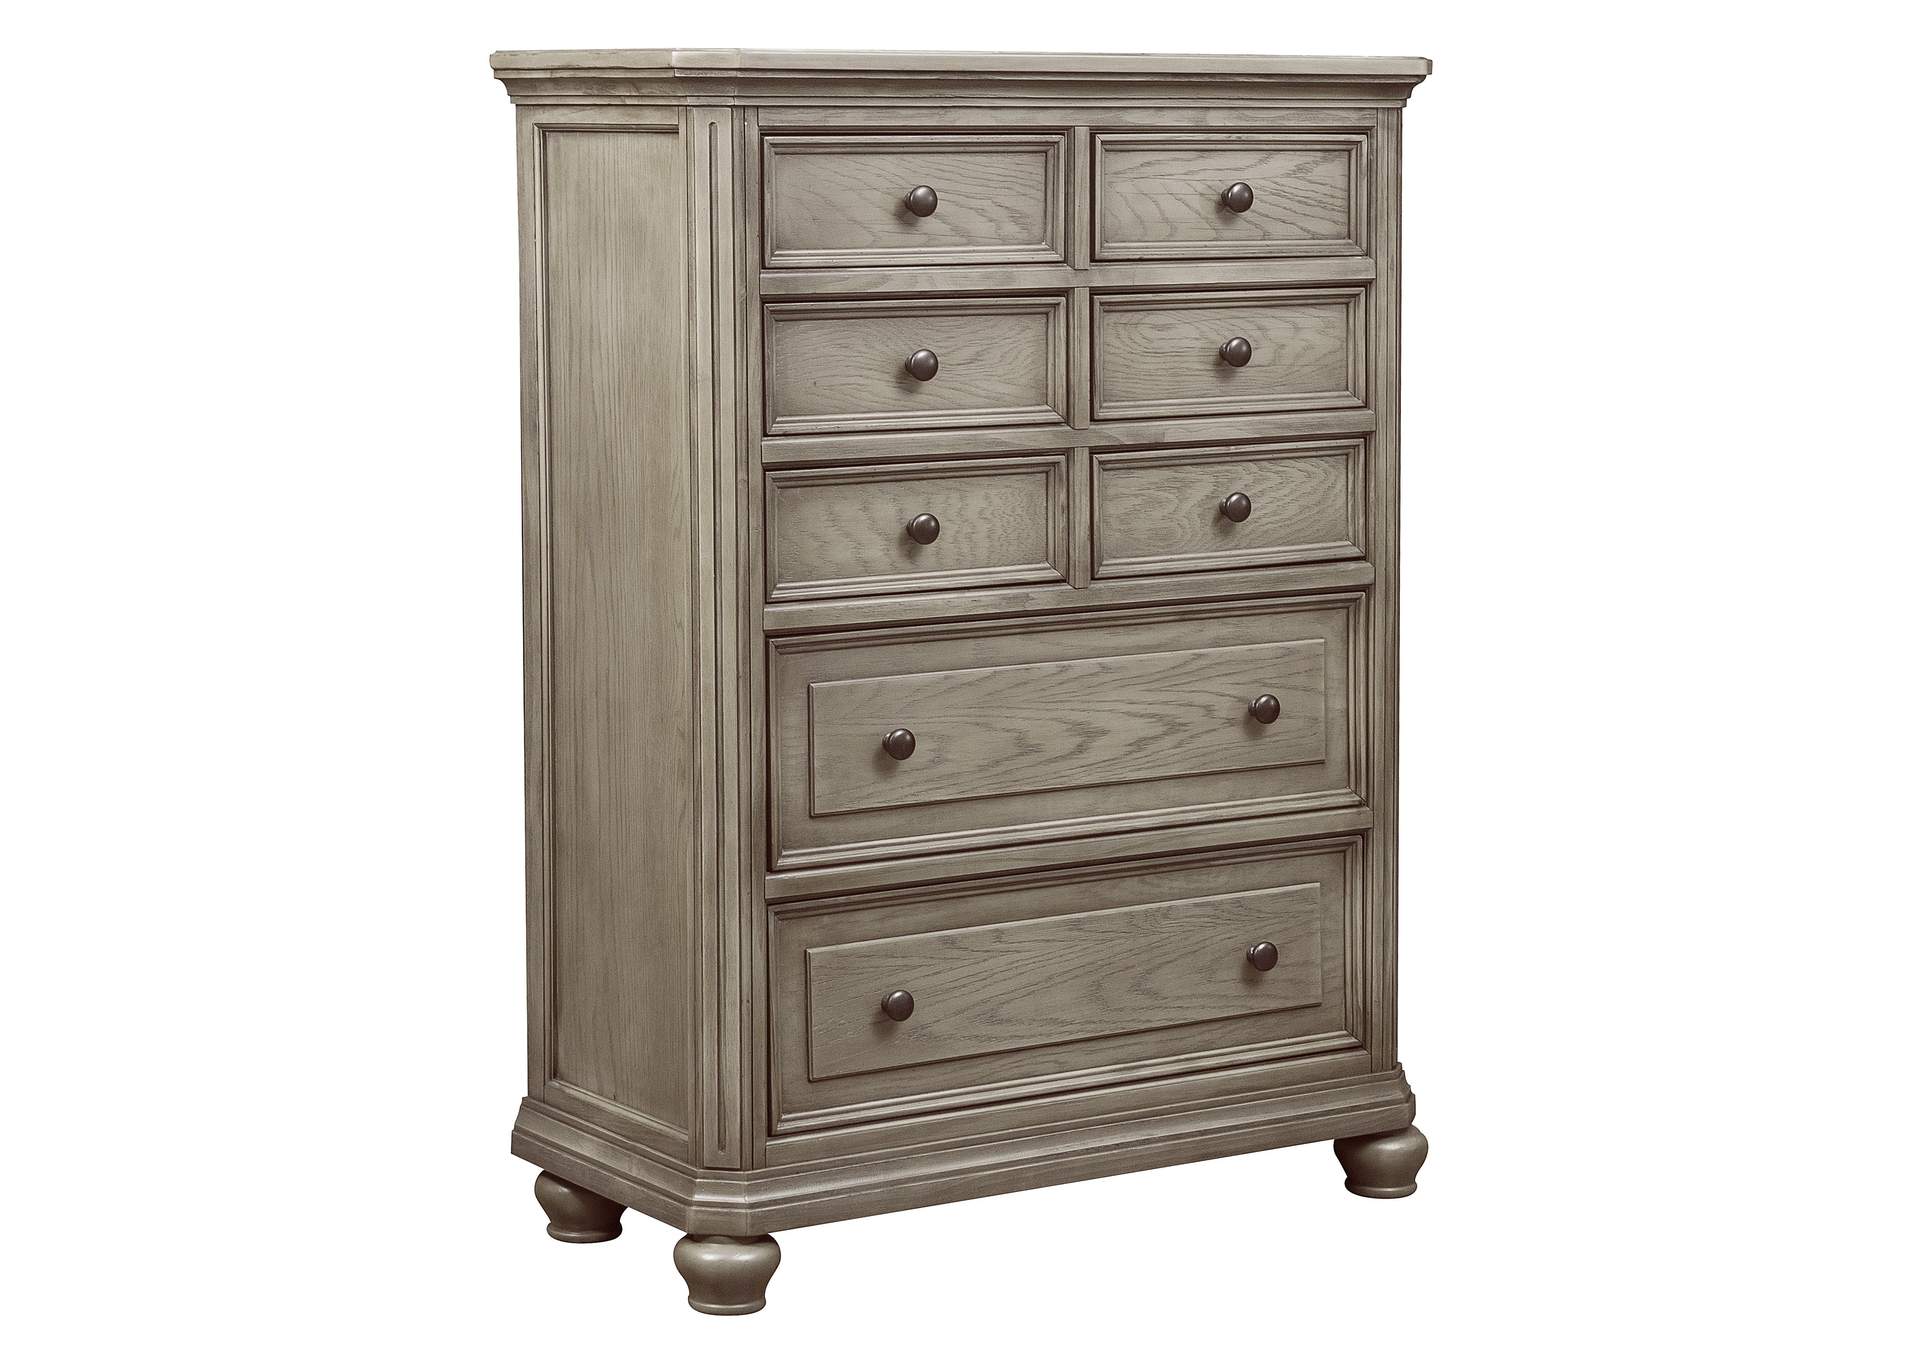 Lavonia Ash Chest,Homelegance